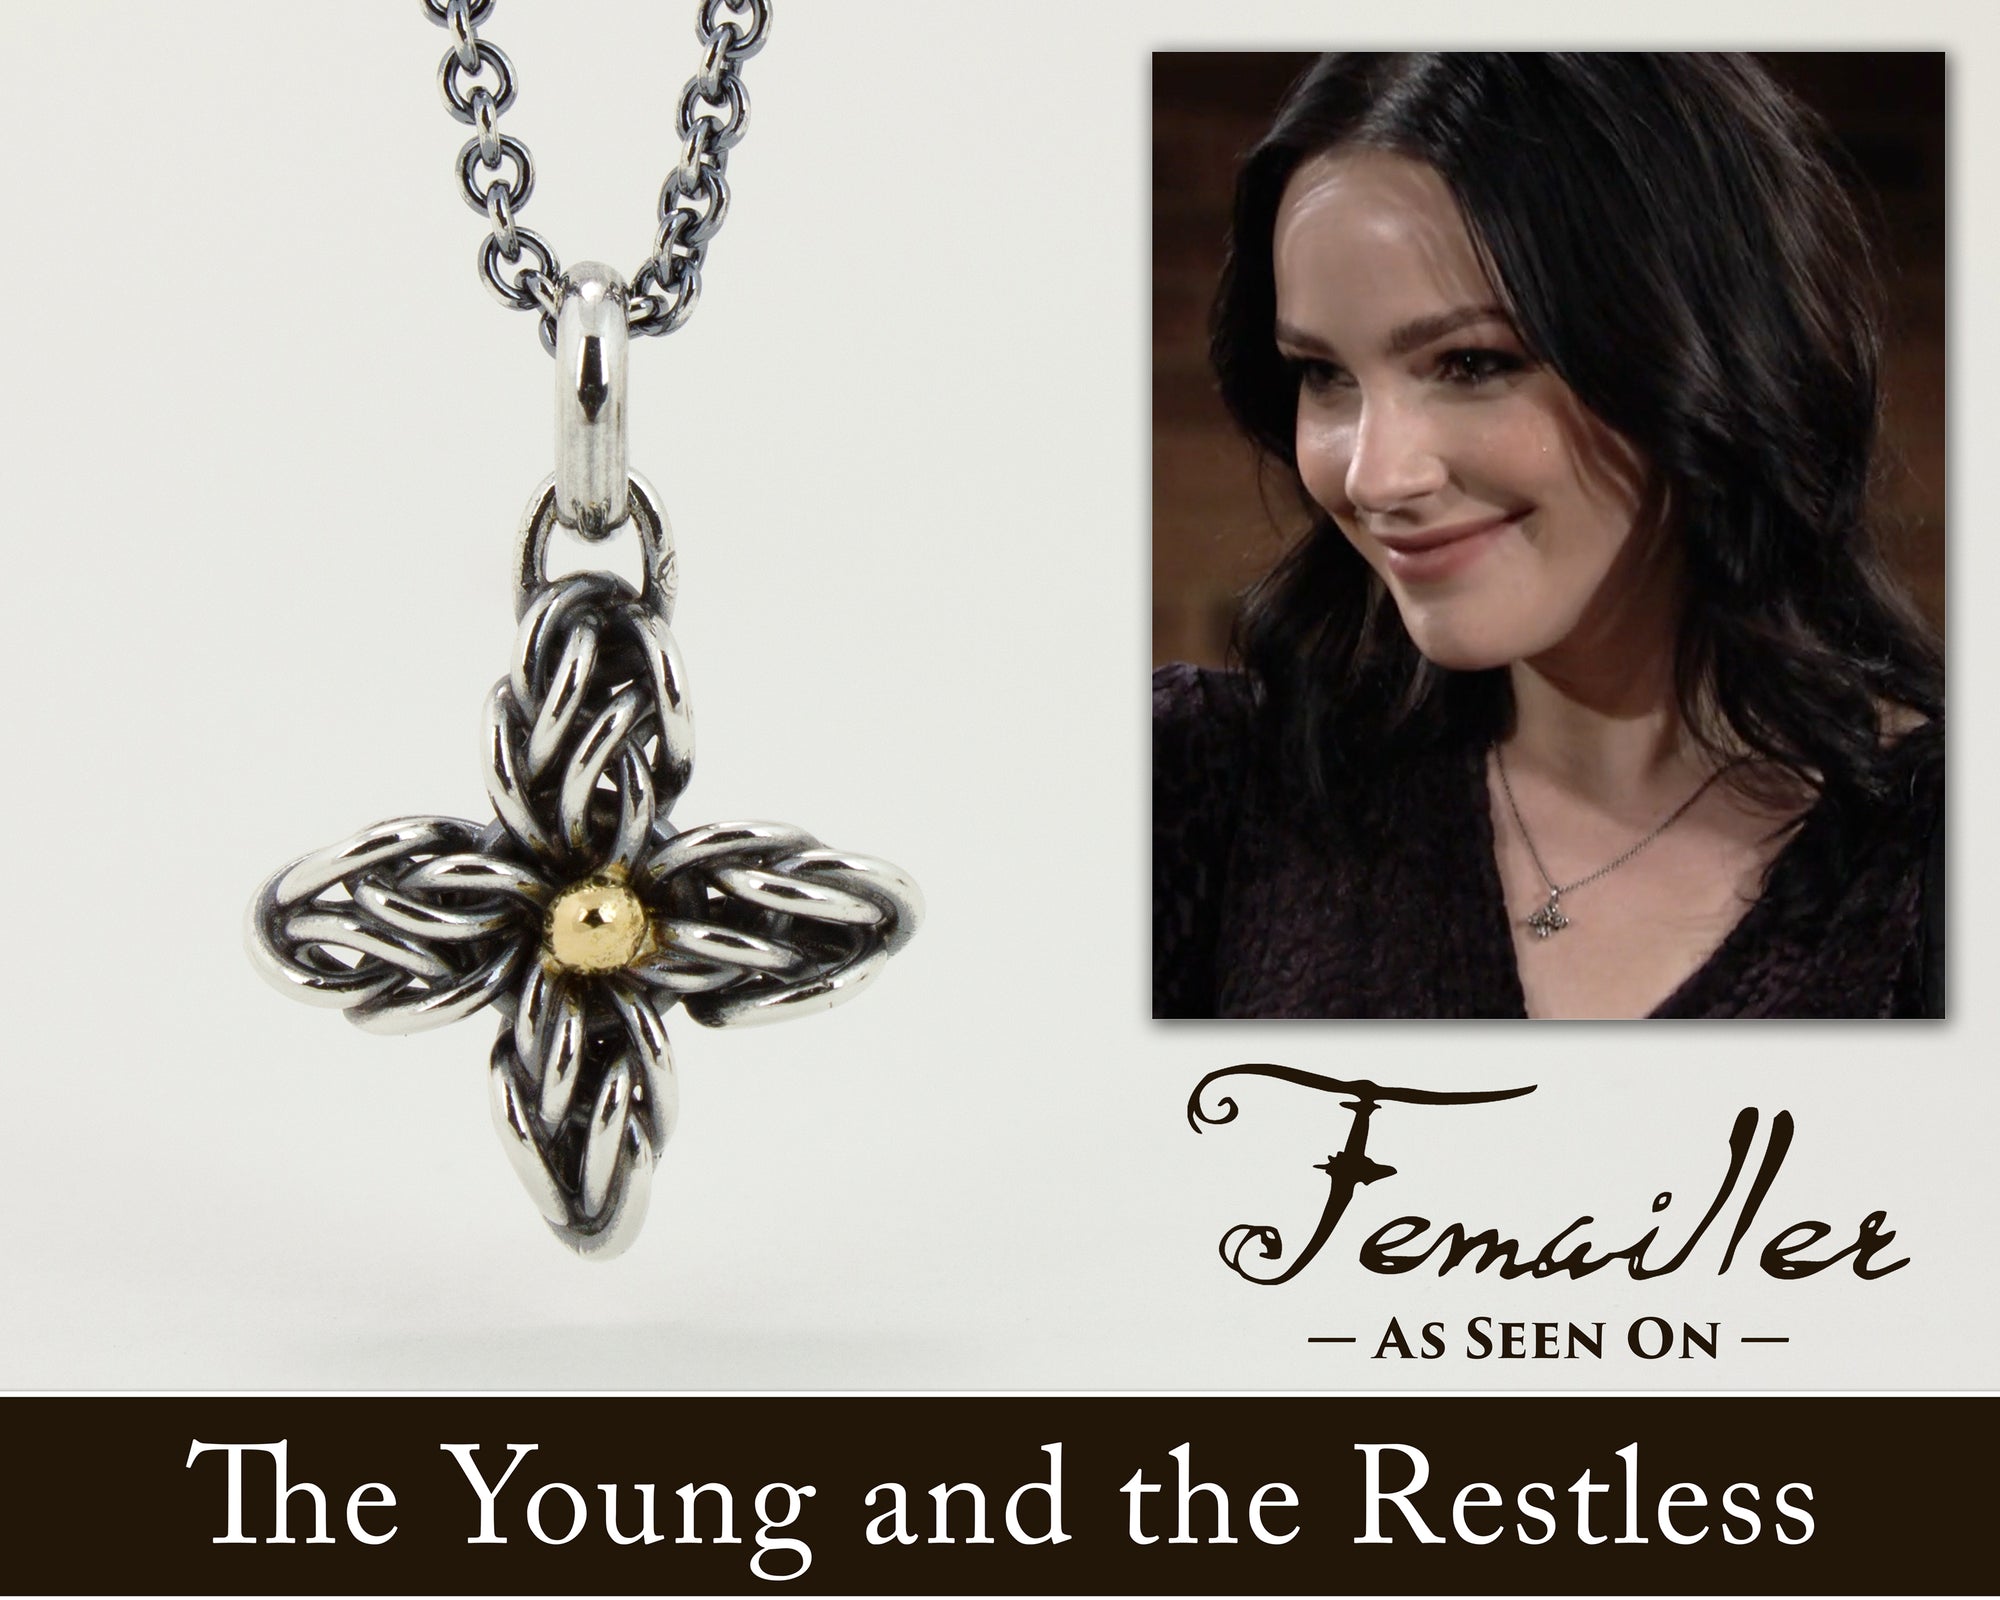 Femailler on The Young and the Restless (5th time!)